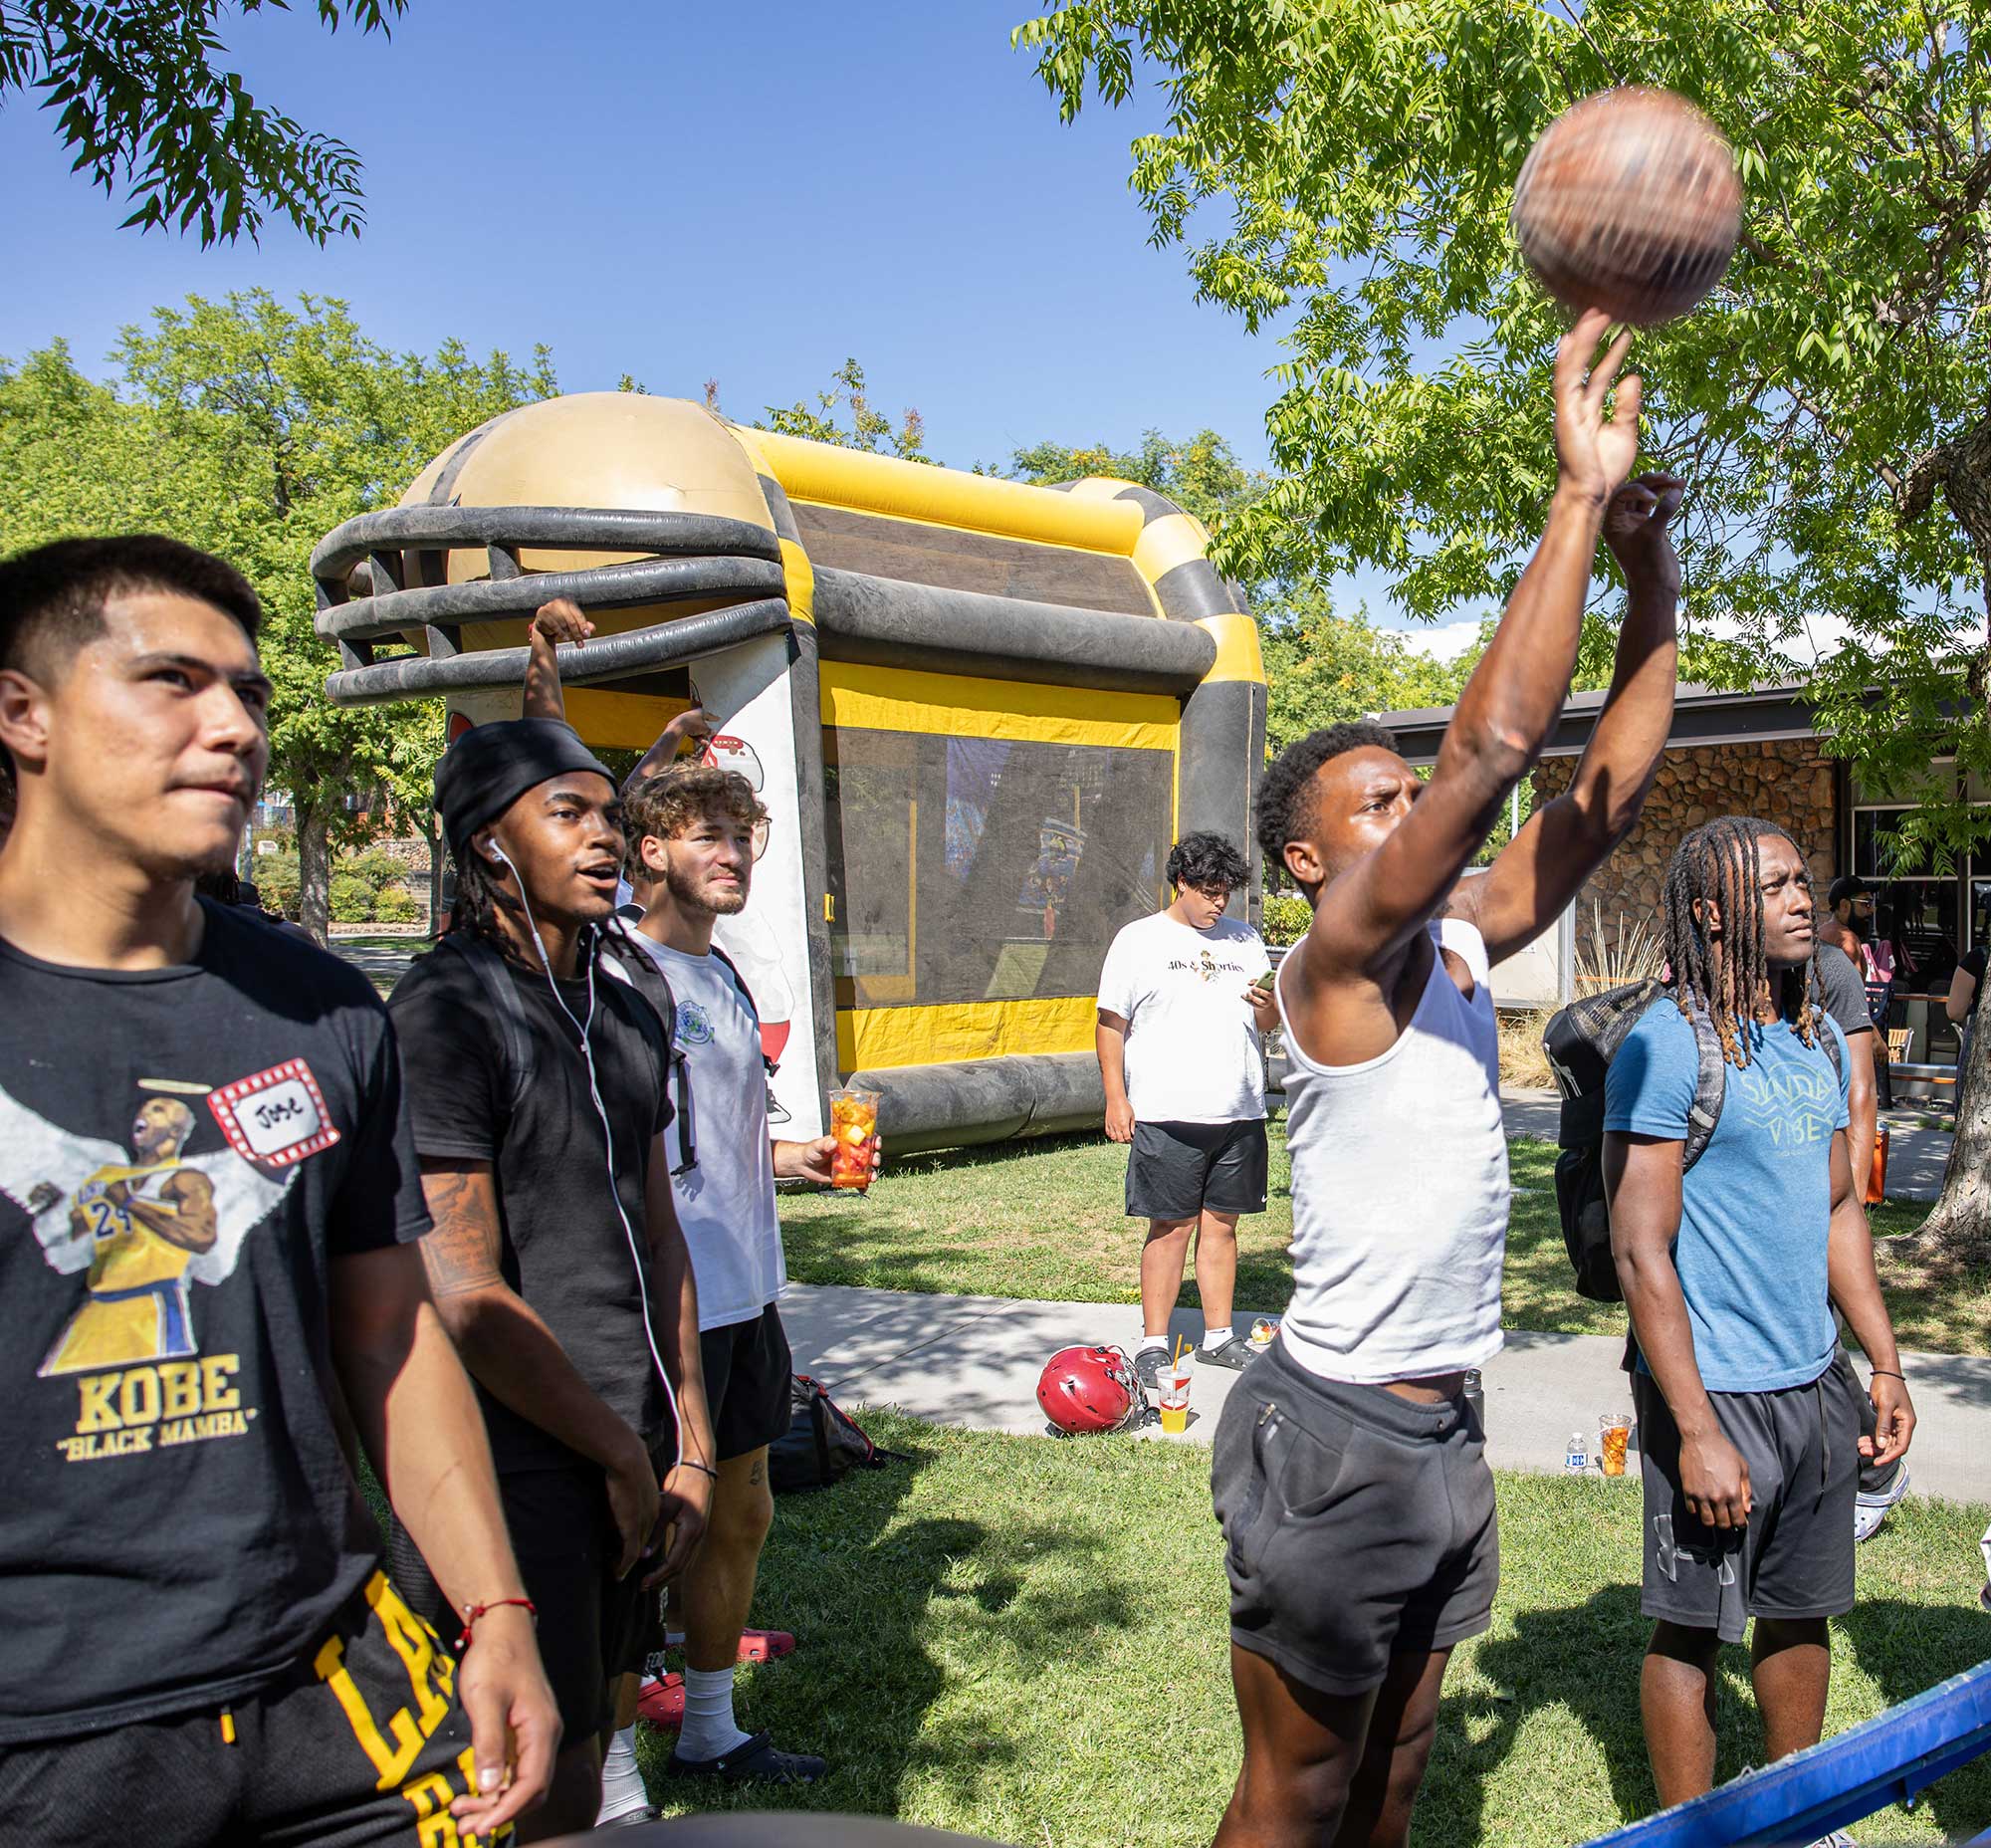 Student attempts to get basketball into a hoop as students look on.